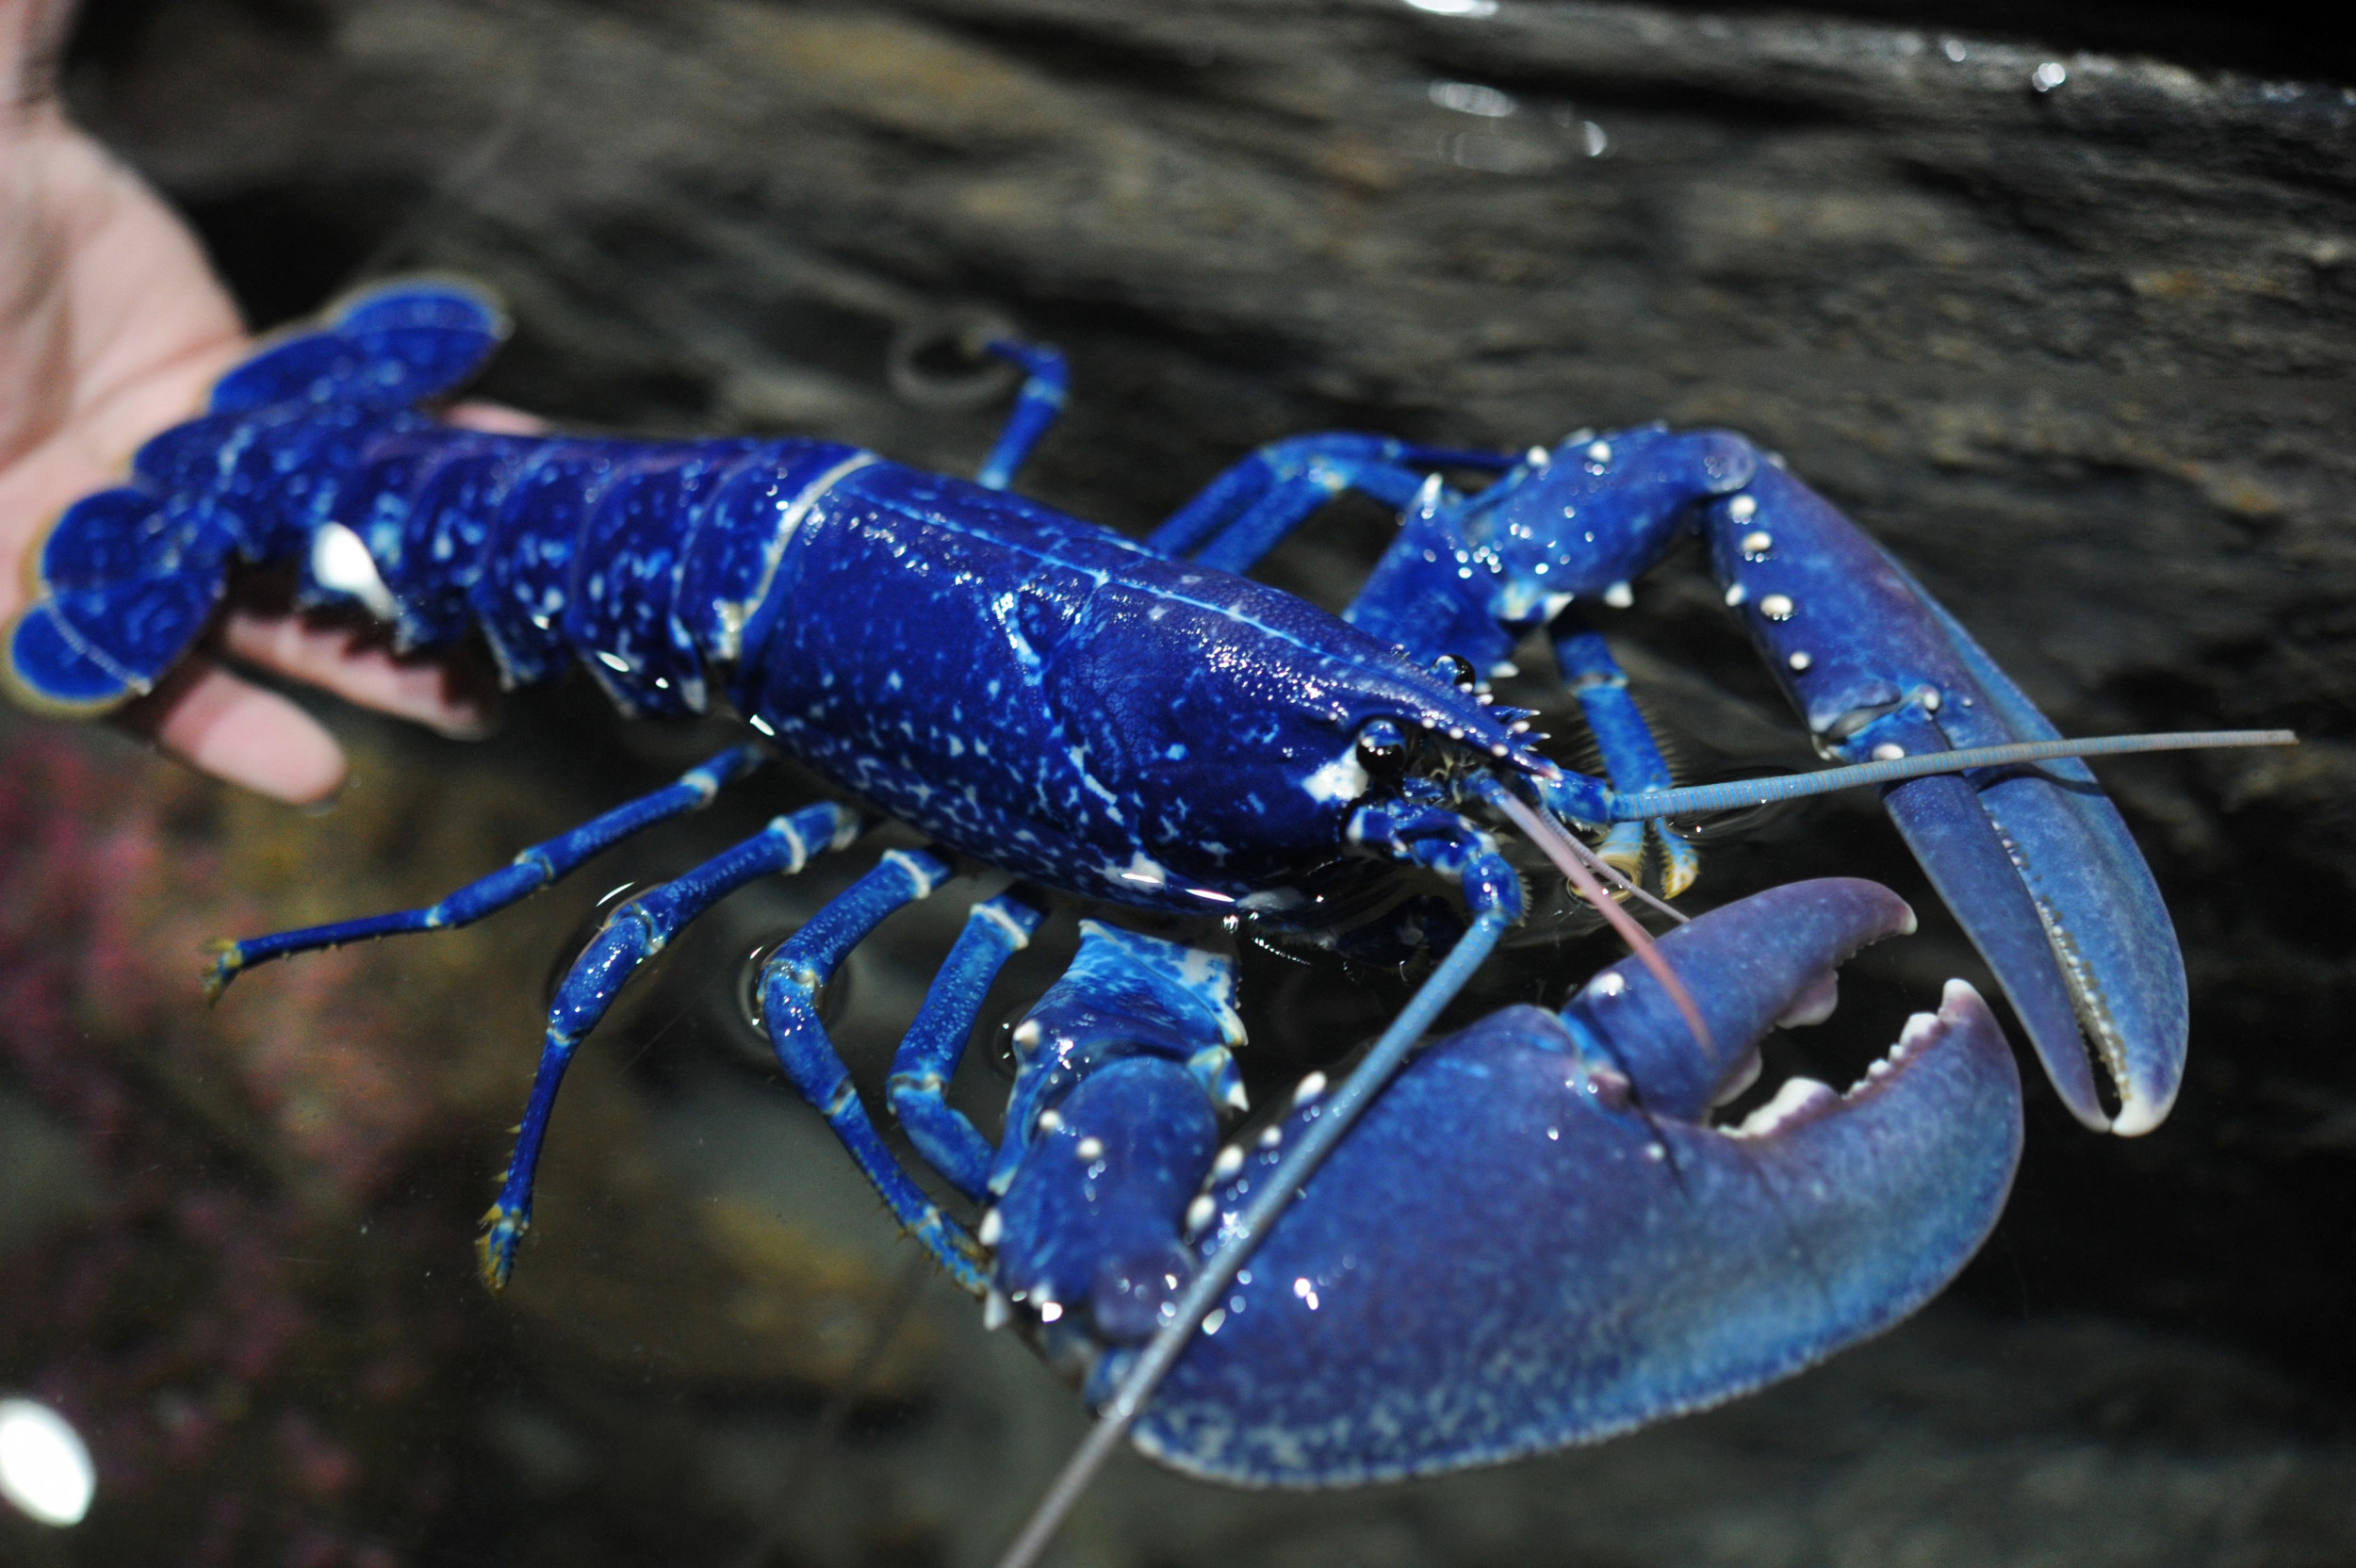 Fisherman Catches Rare Blue Lobster, Throws It Back in the Ocean